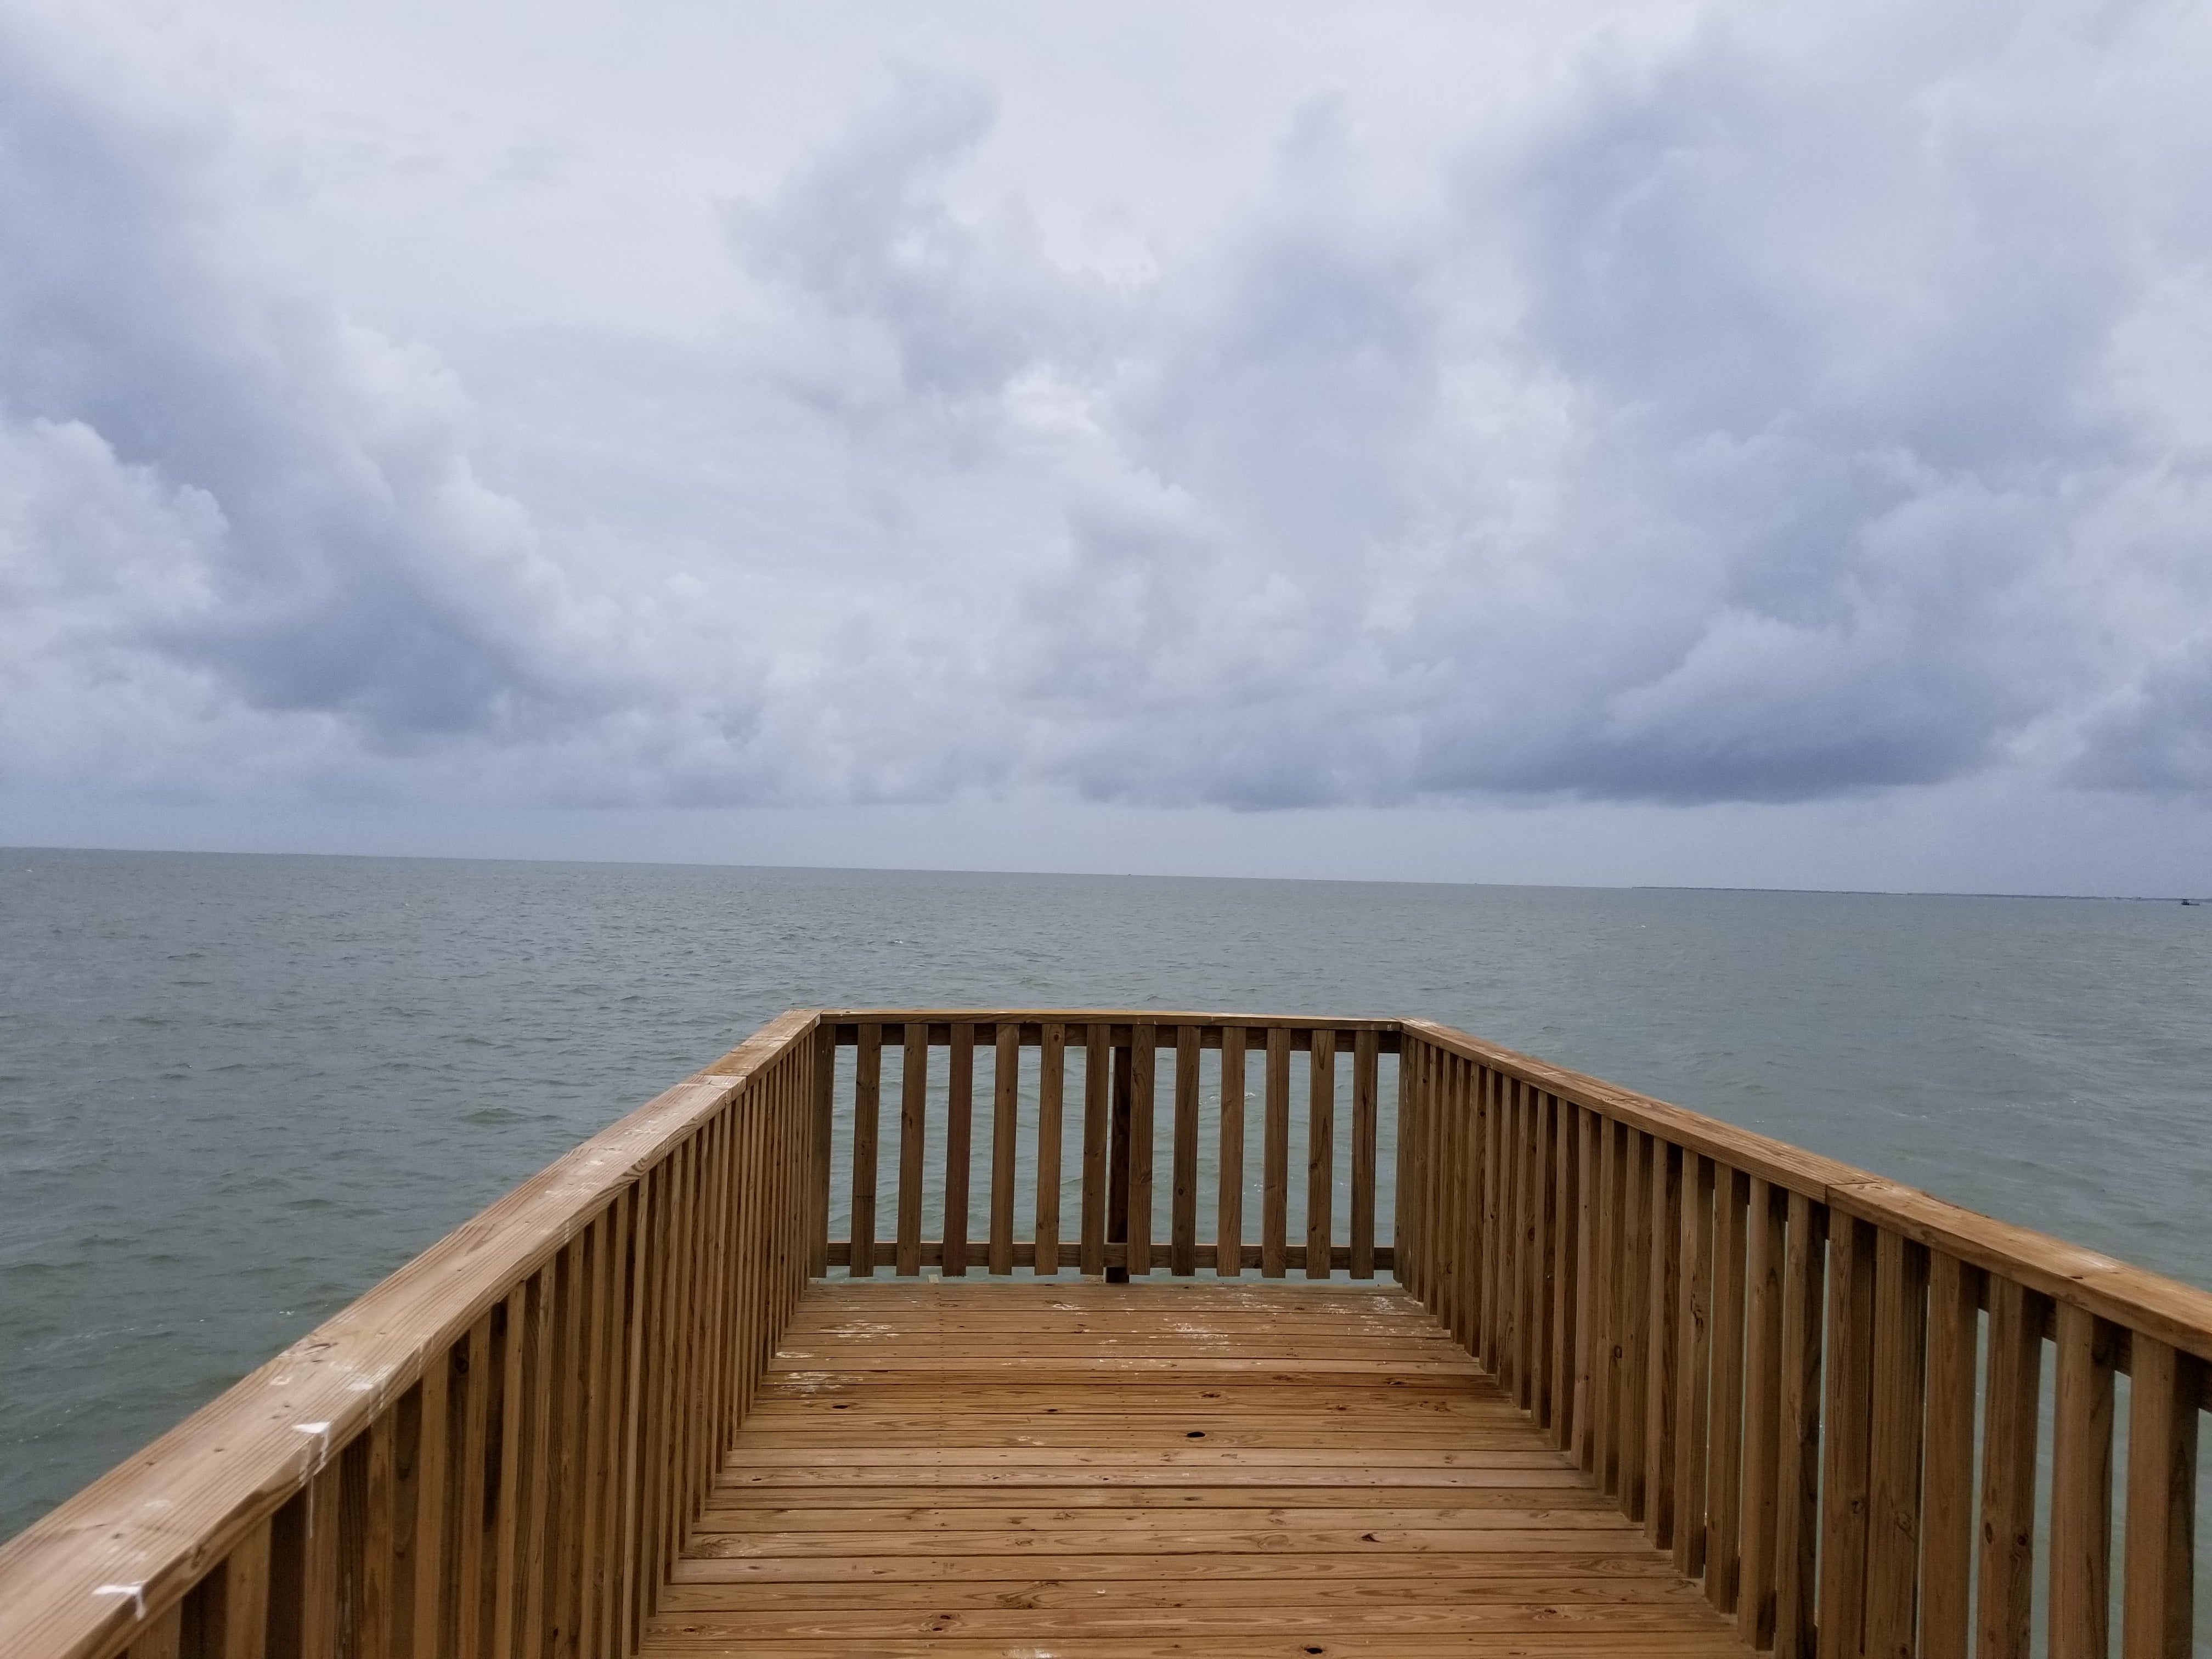 View from end of brand new (not yet open) pier.  To the left would be Saint Charles Bay, to the right would be Aransas Bay.